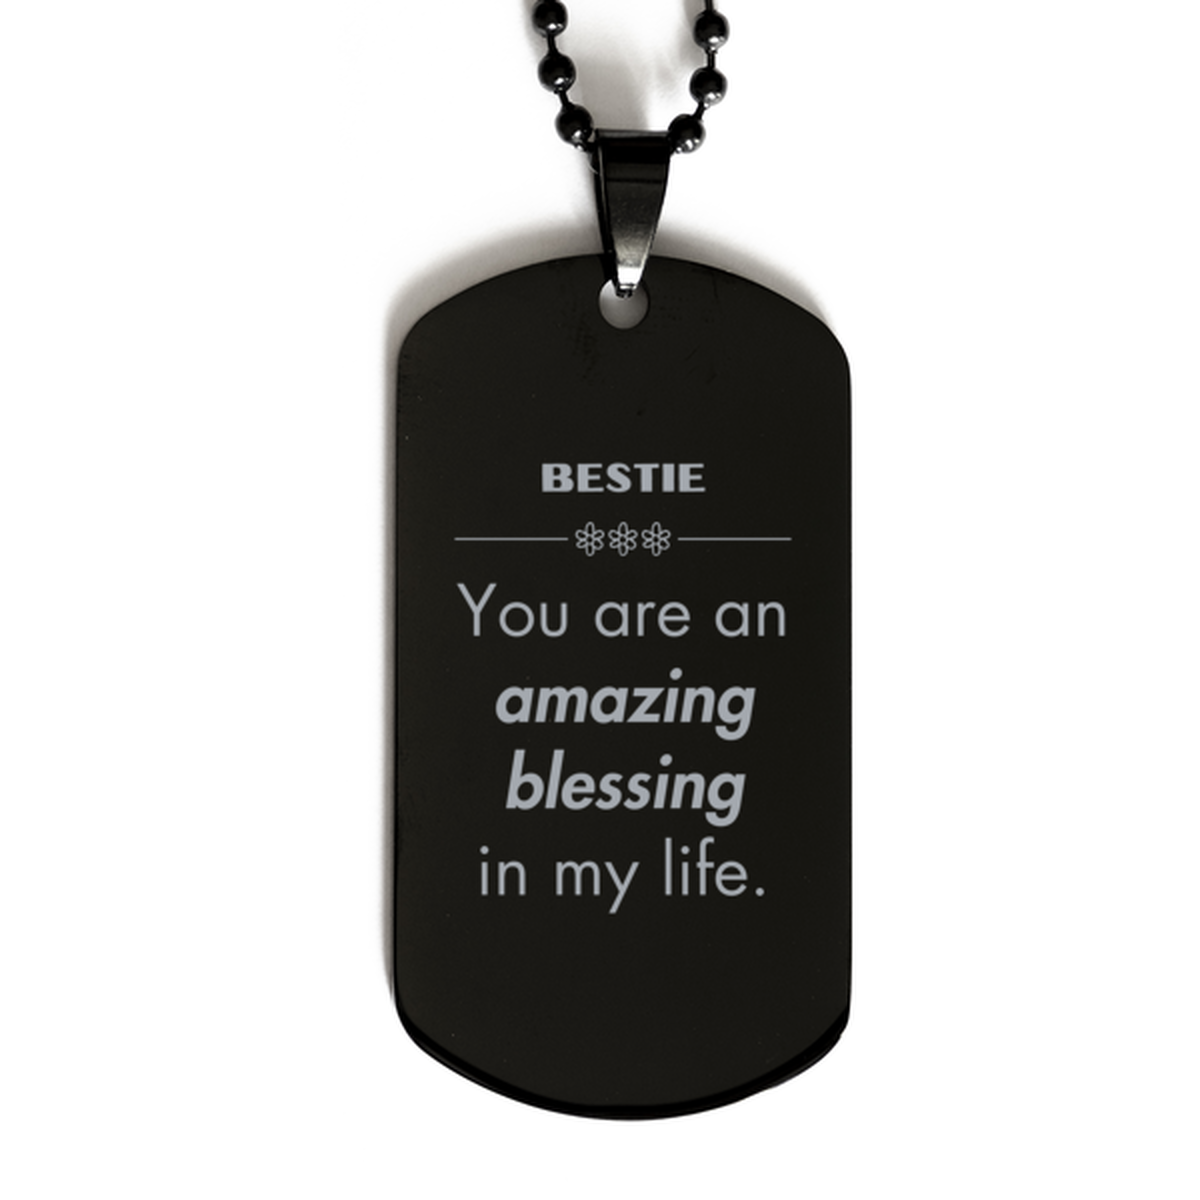 Bestie Black Dog Tag, You are an amazing blessing in my life, Thank You Gifts For Bestie, Inspirational Birthday Christmas Unique Gifts For Bestie